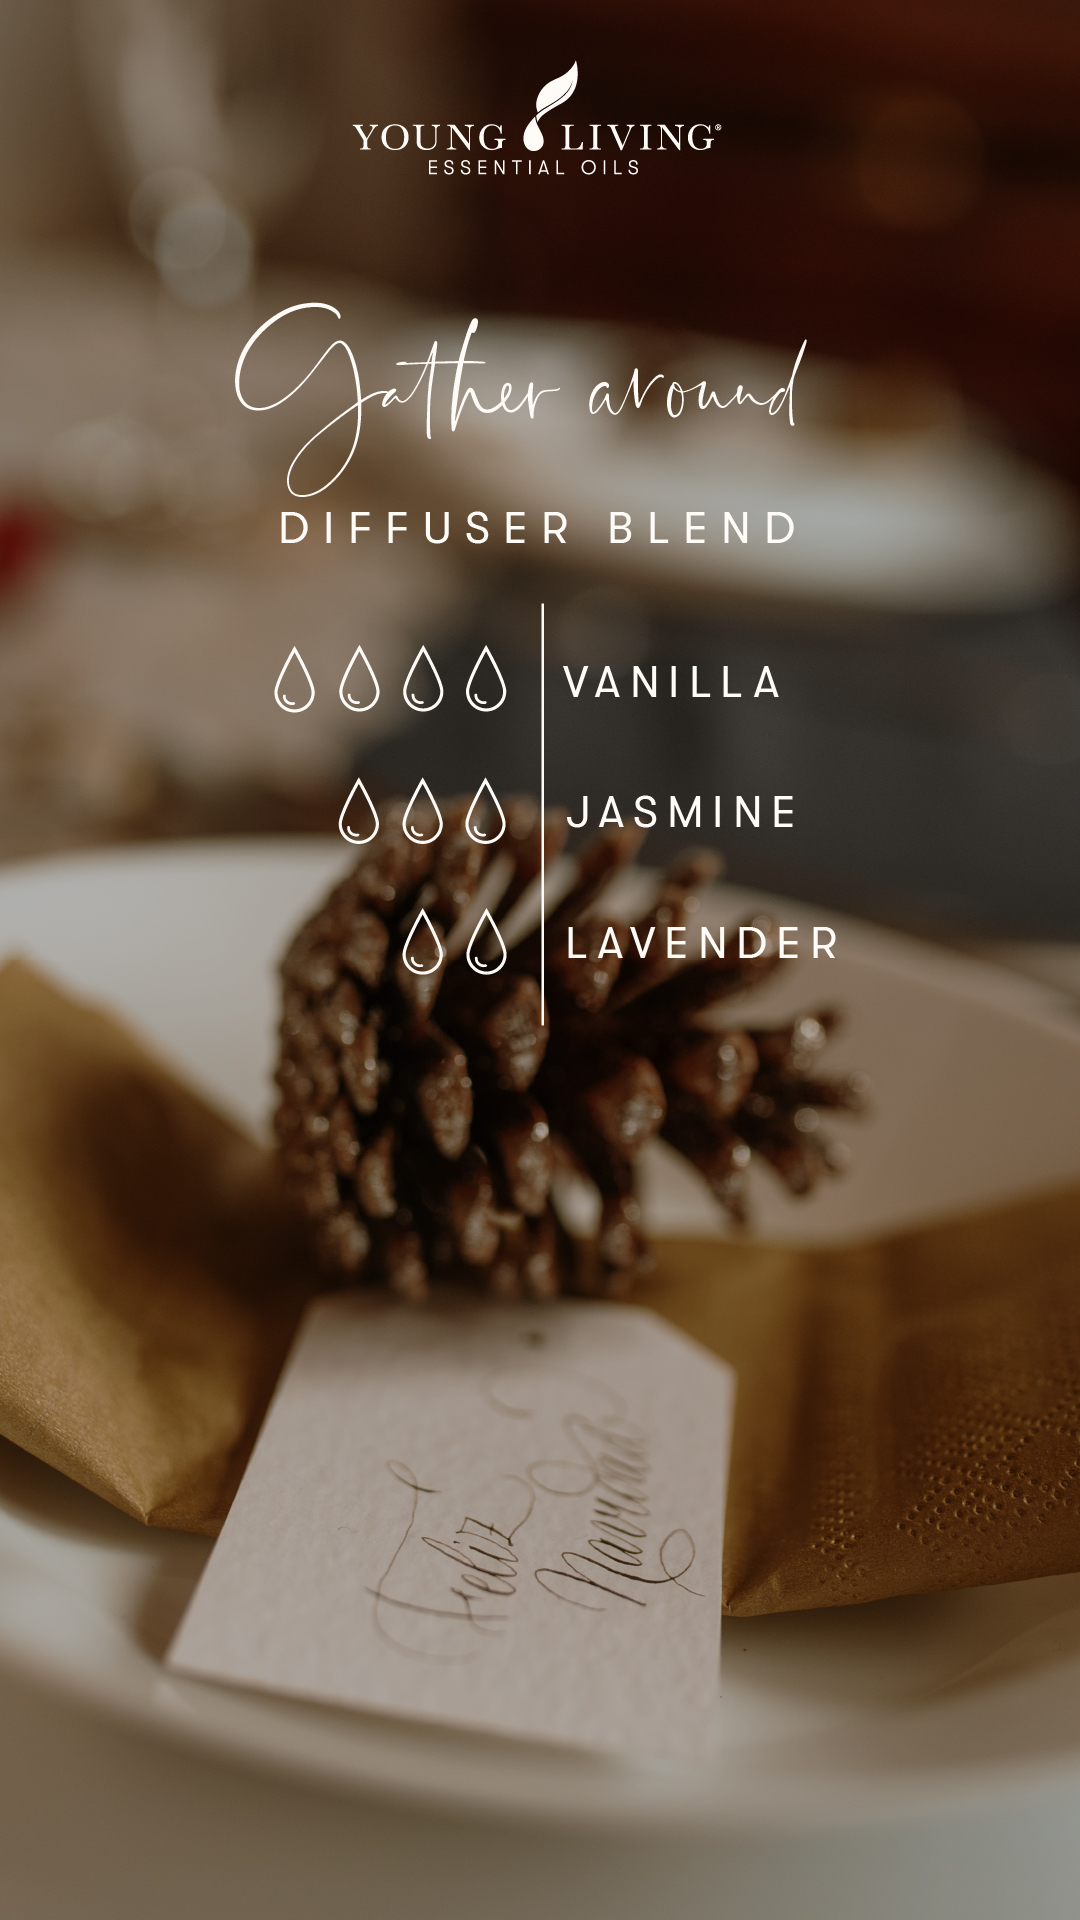 Young Living Holiday Diffuser Blend - Gather Round